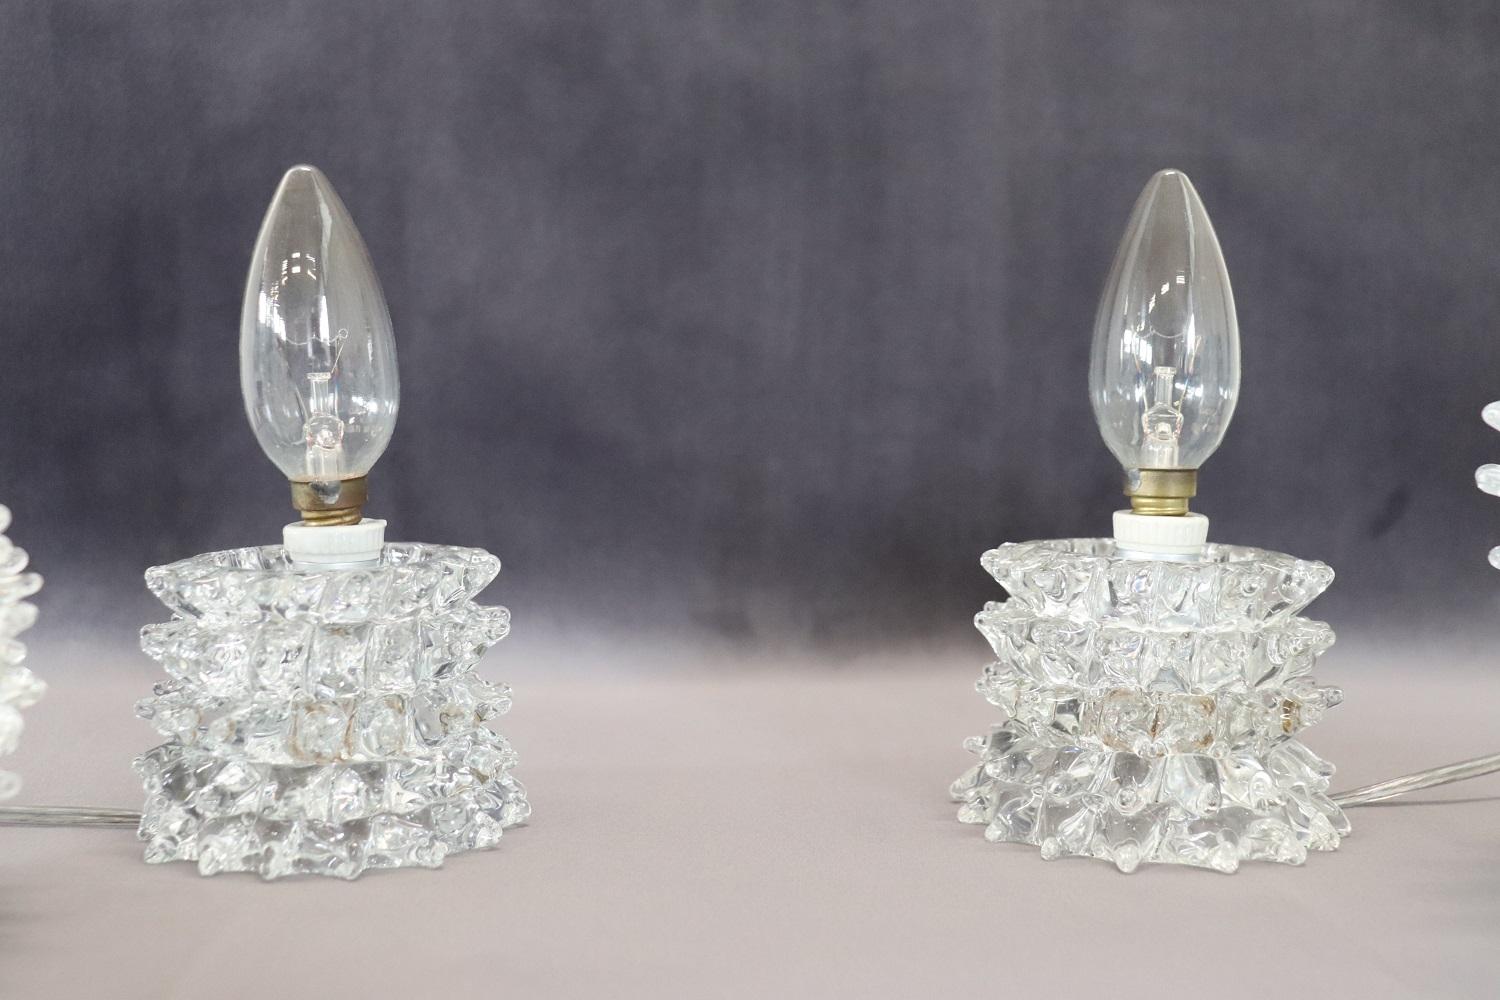 Transparent Murano Glass Pair of Table Lamps by Barovier & Toso, 1940s 1